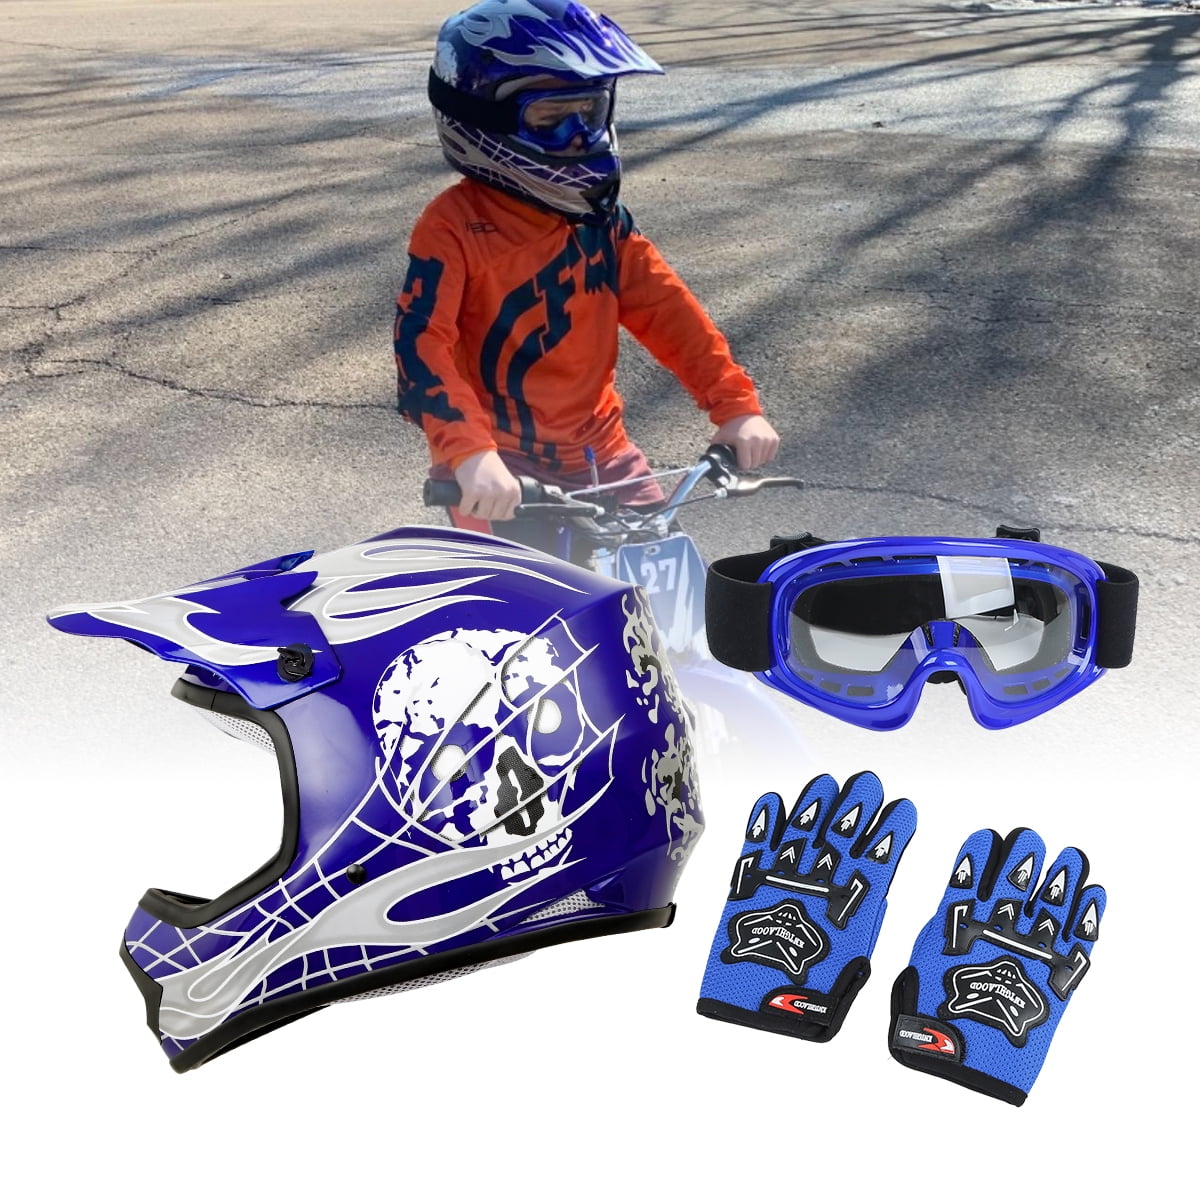 NEW Kids Youth Goggles for PeeWee PW Bike Motorcycle BMX Dirt Bike Off Road ATV 